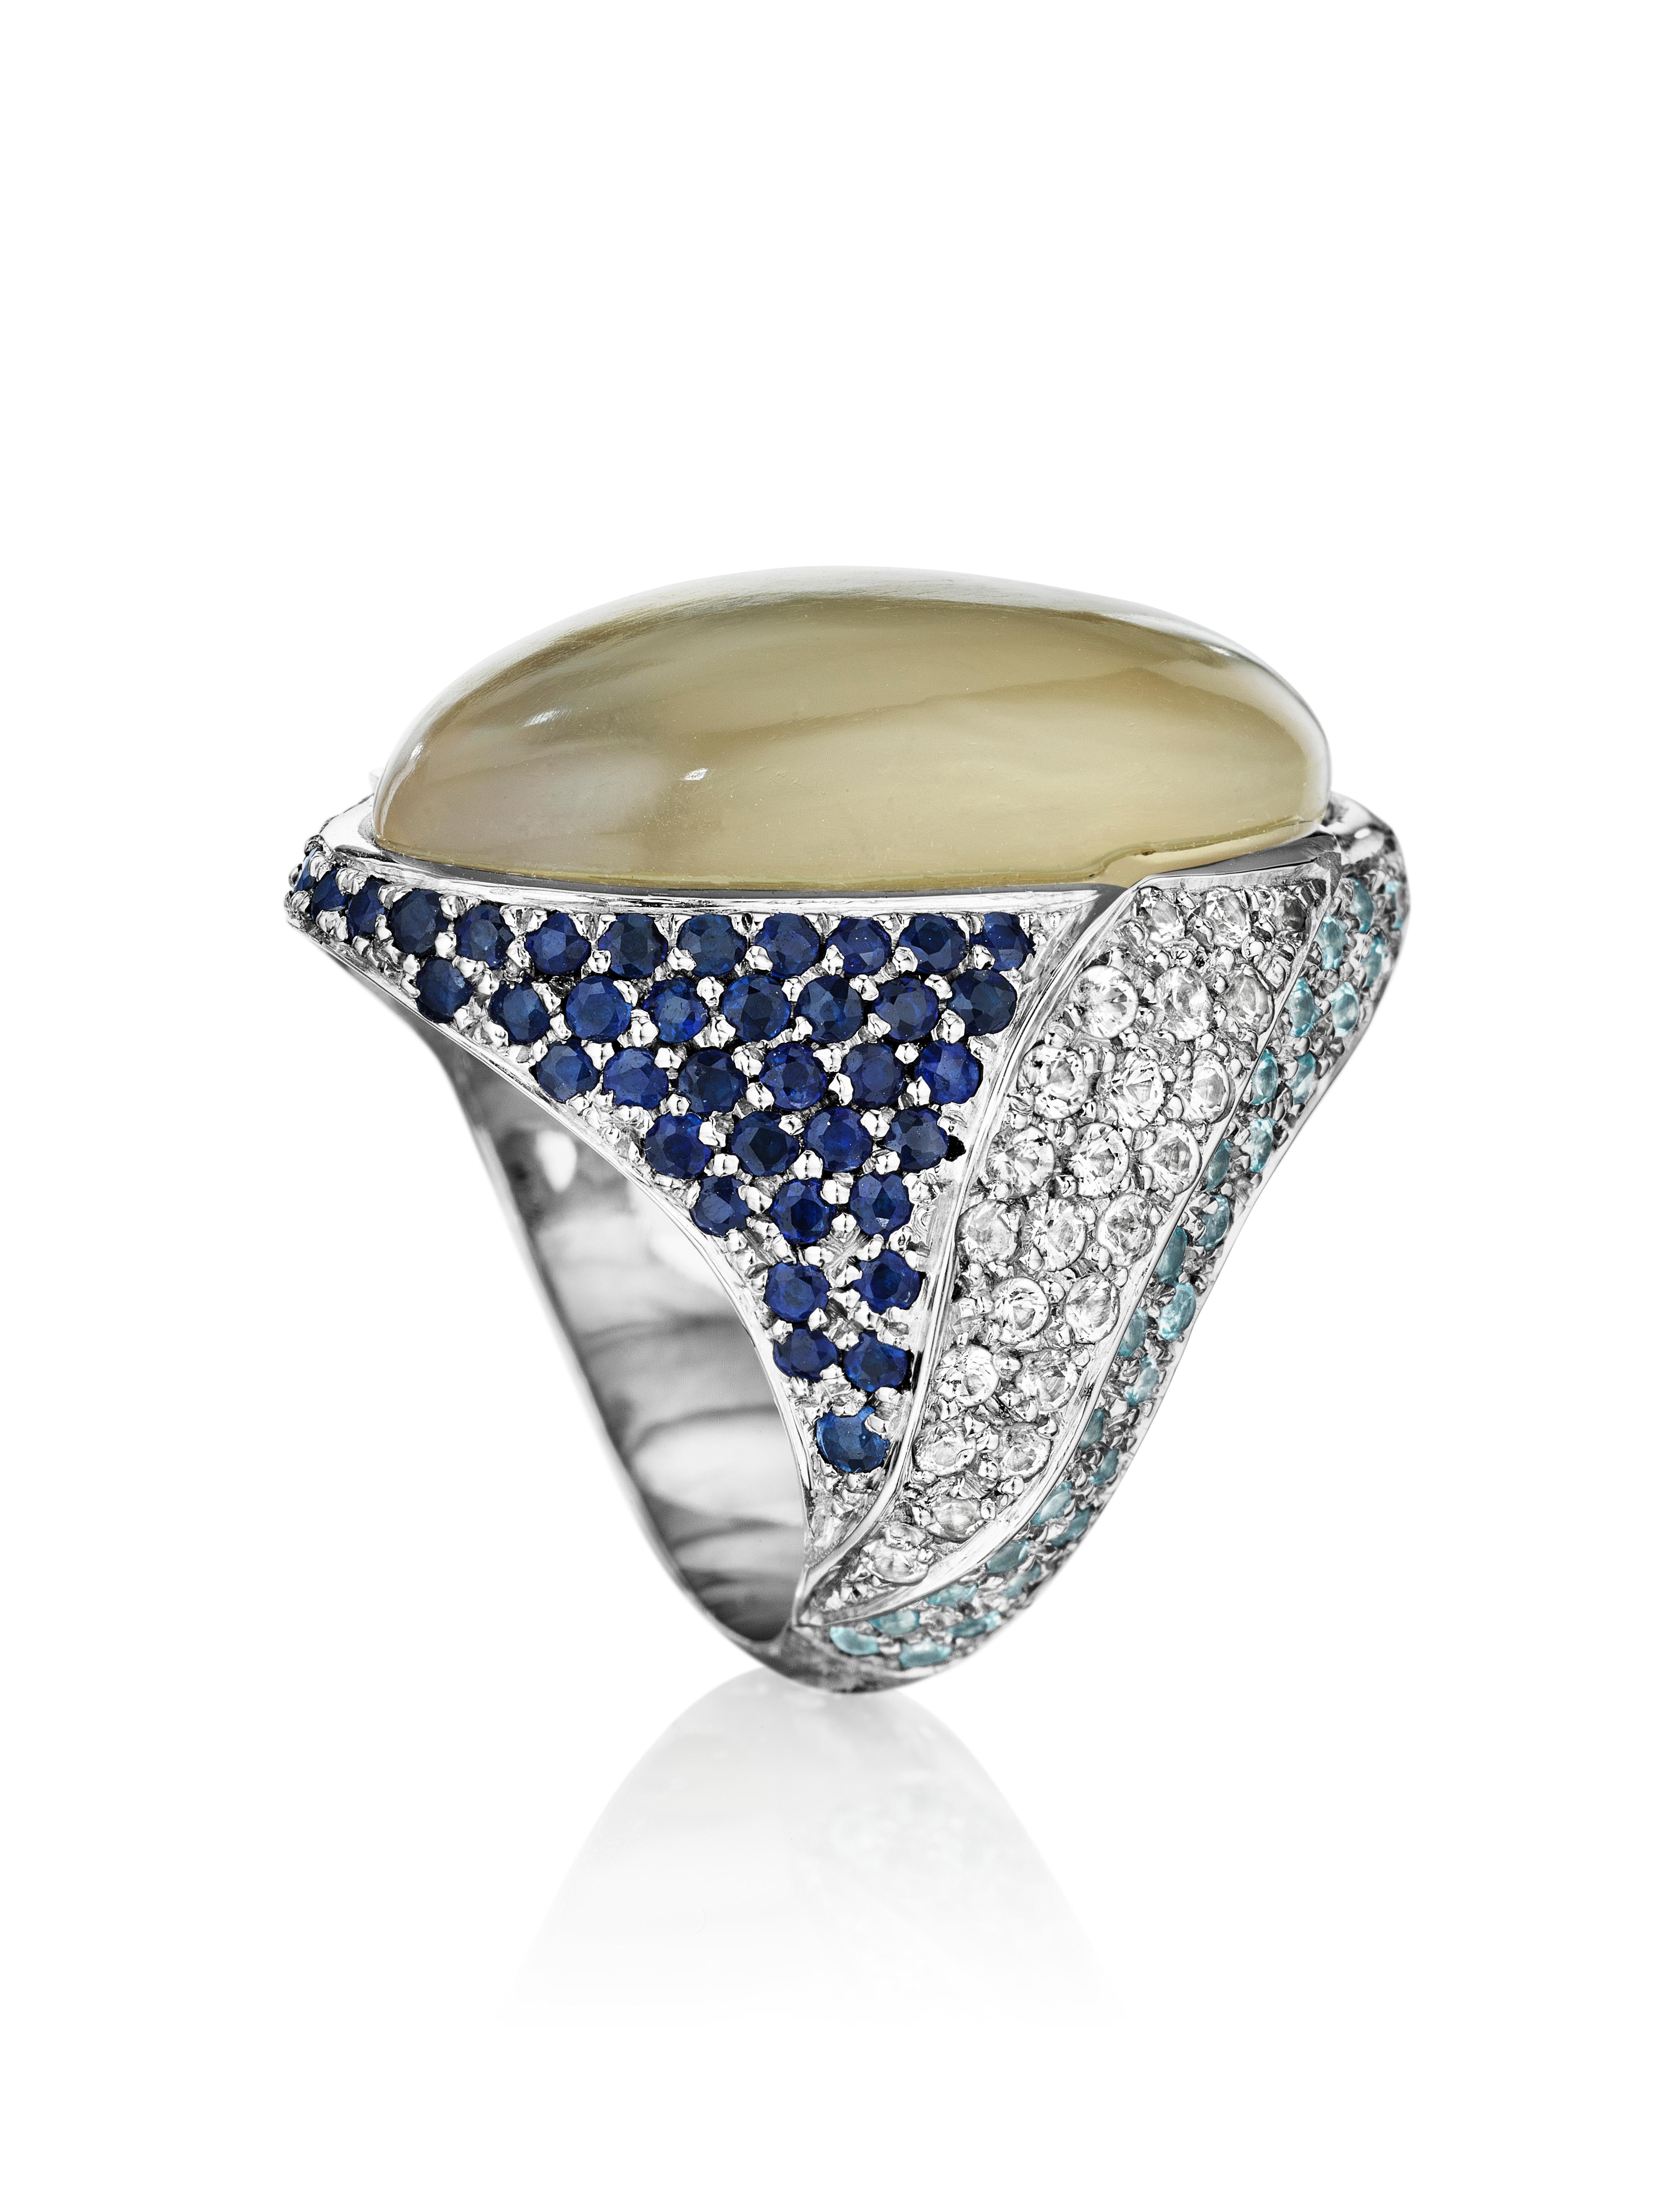 Inspired by coastline and view of the ocean waves under the winter sky. Ring features Grey Moonstone, Blue Sapphires, Aquamarines, and White Sapphires set in 18k white gold. 

Size 7.5 

Dimension:  2.0cm face width, 2.8cm face length